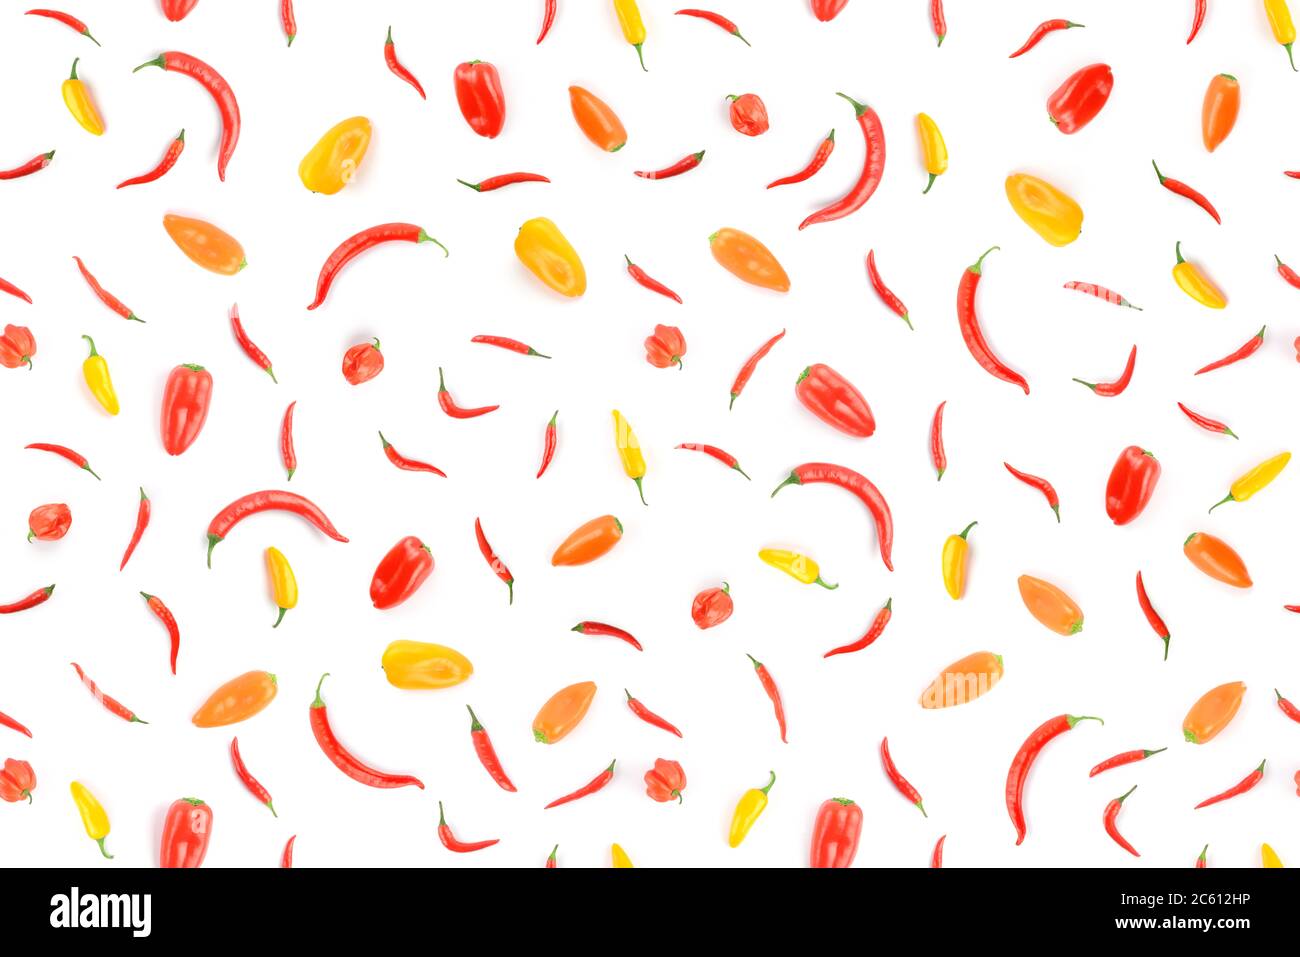 Seamless pattern of various varieties of pepper isolated on white background. Stock Photo